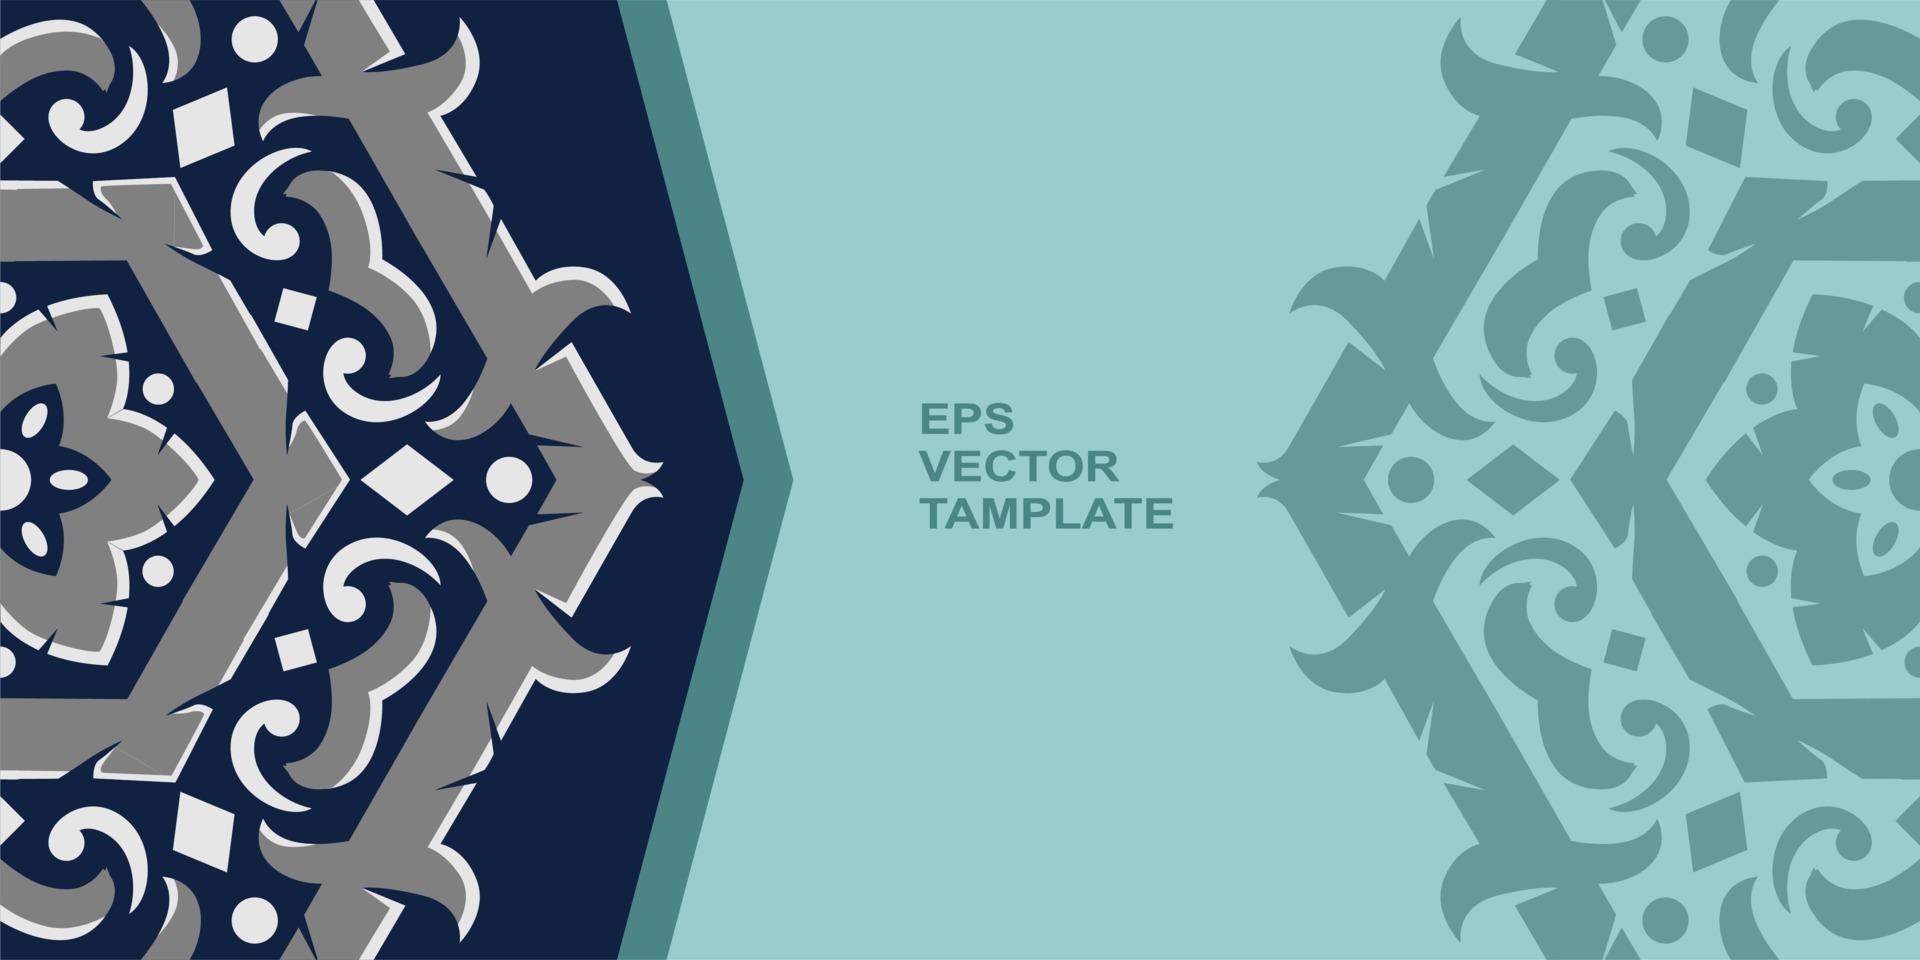 vector mandala design, for your various types of advertising needs